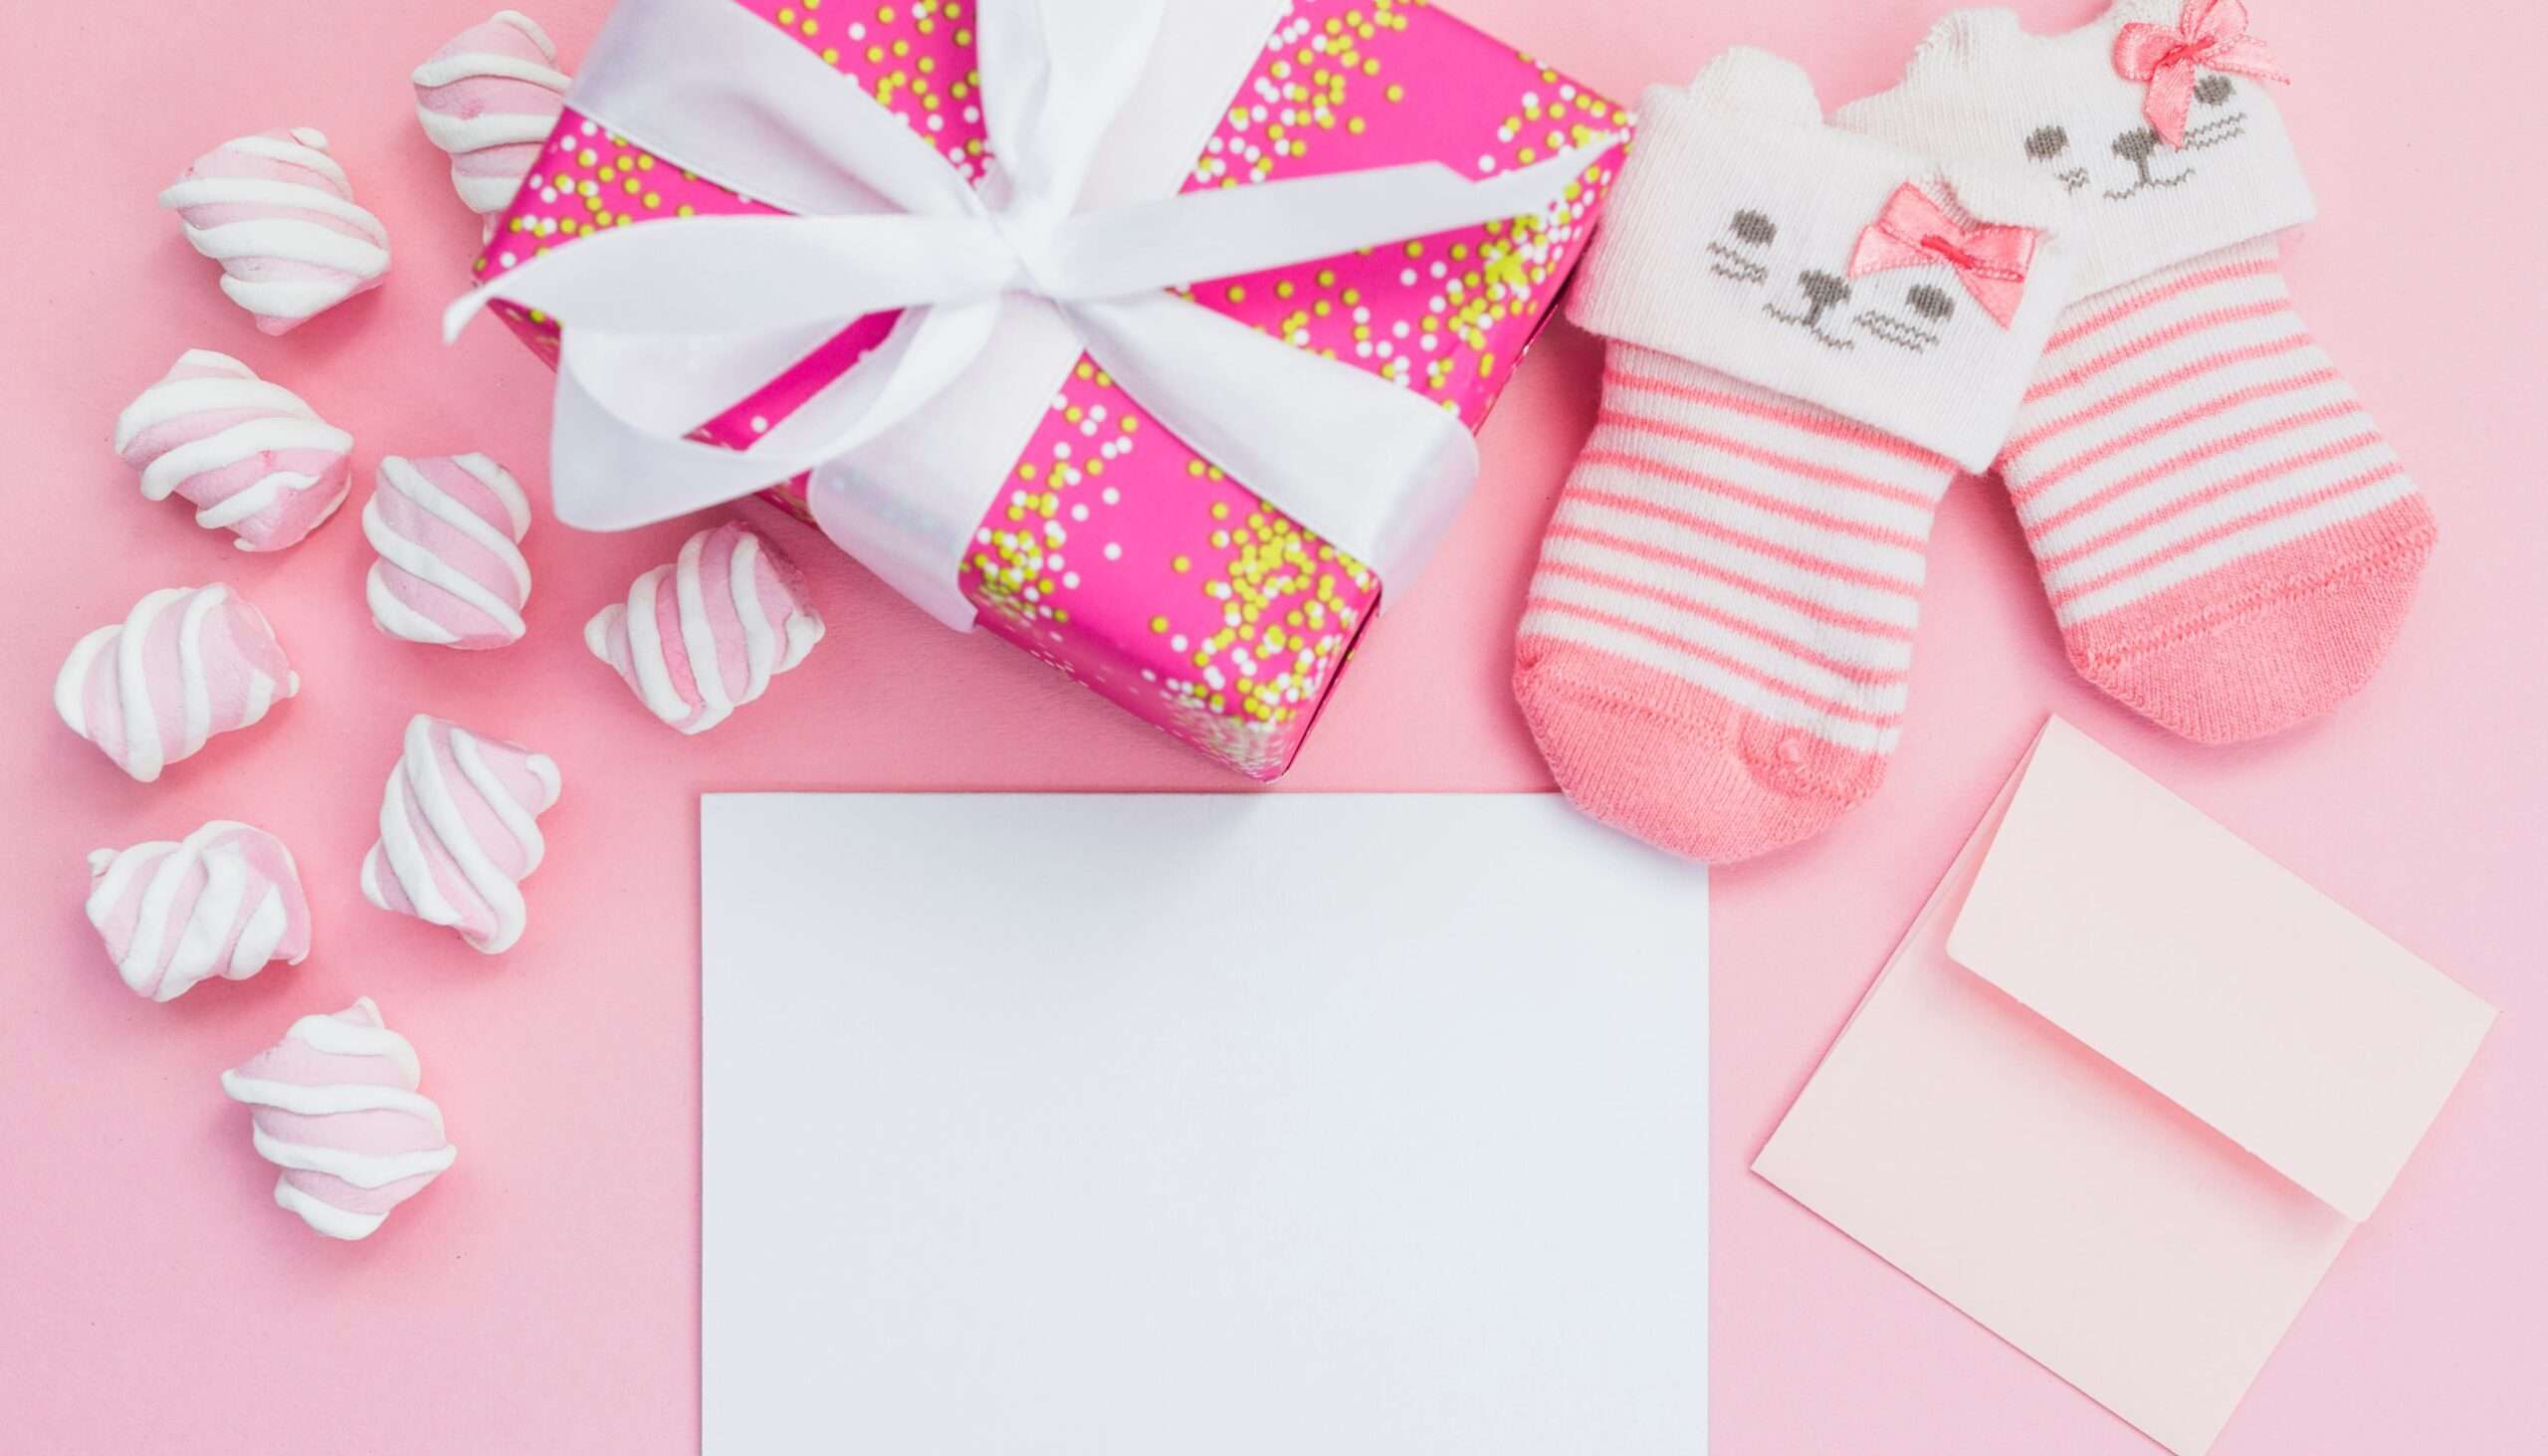 30+ New Baby Gift Ideas, Top Ideas and Tips for Every Budget